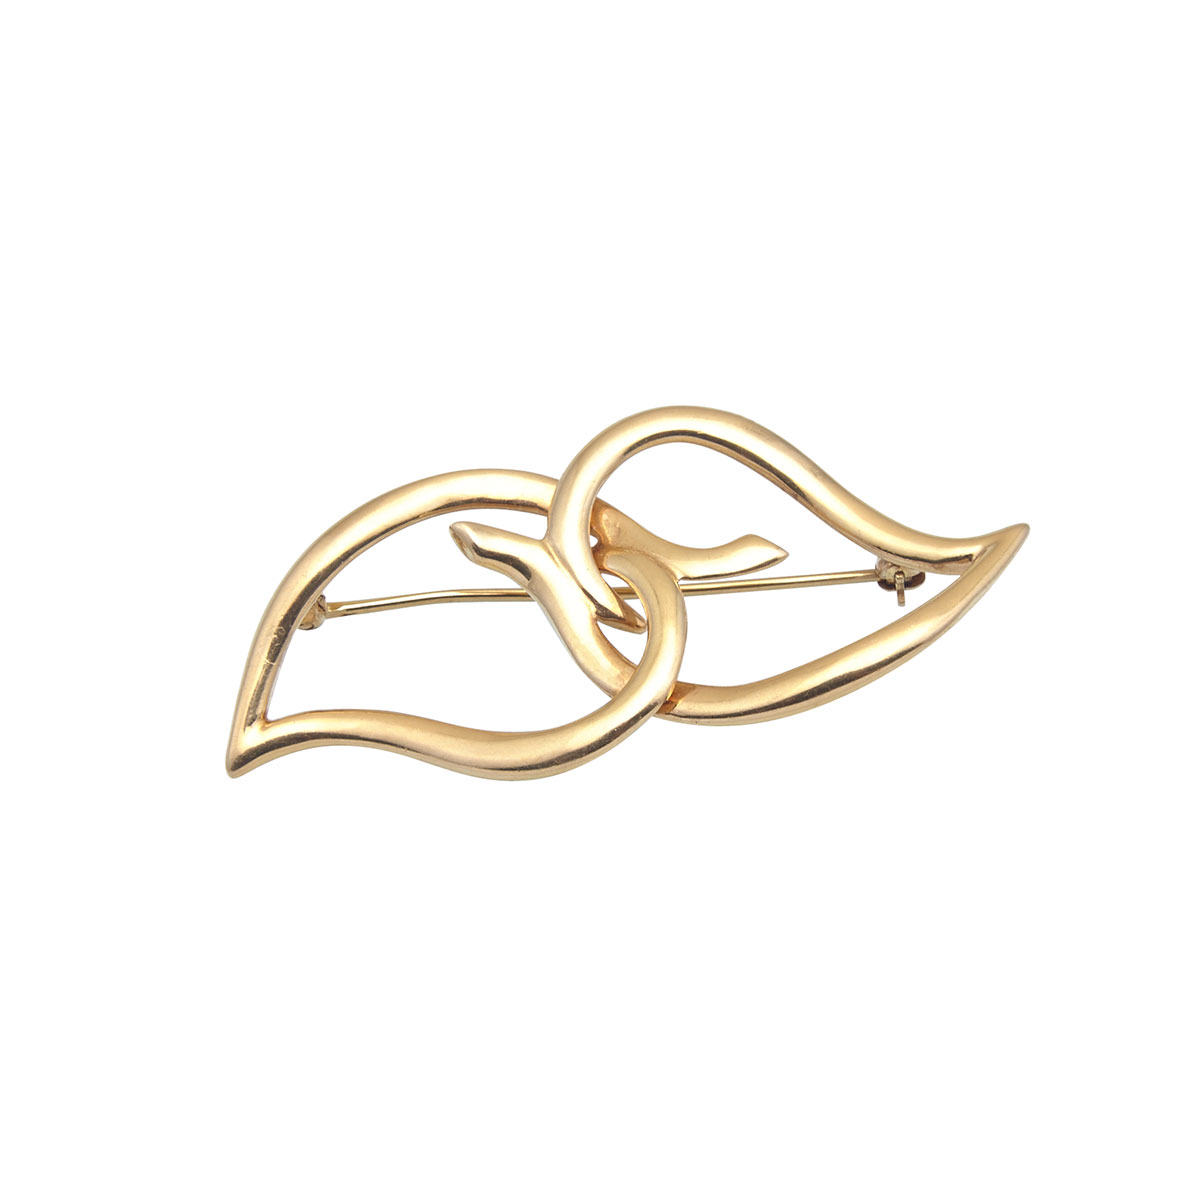 Tiffany & Co. 18k Yellow Gold Double Leaf Brooch